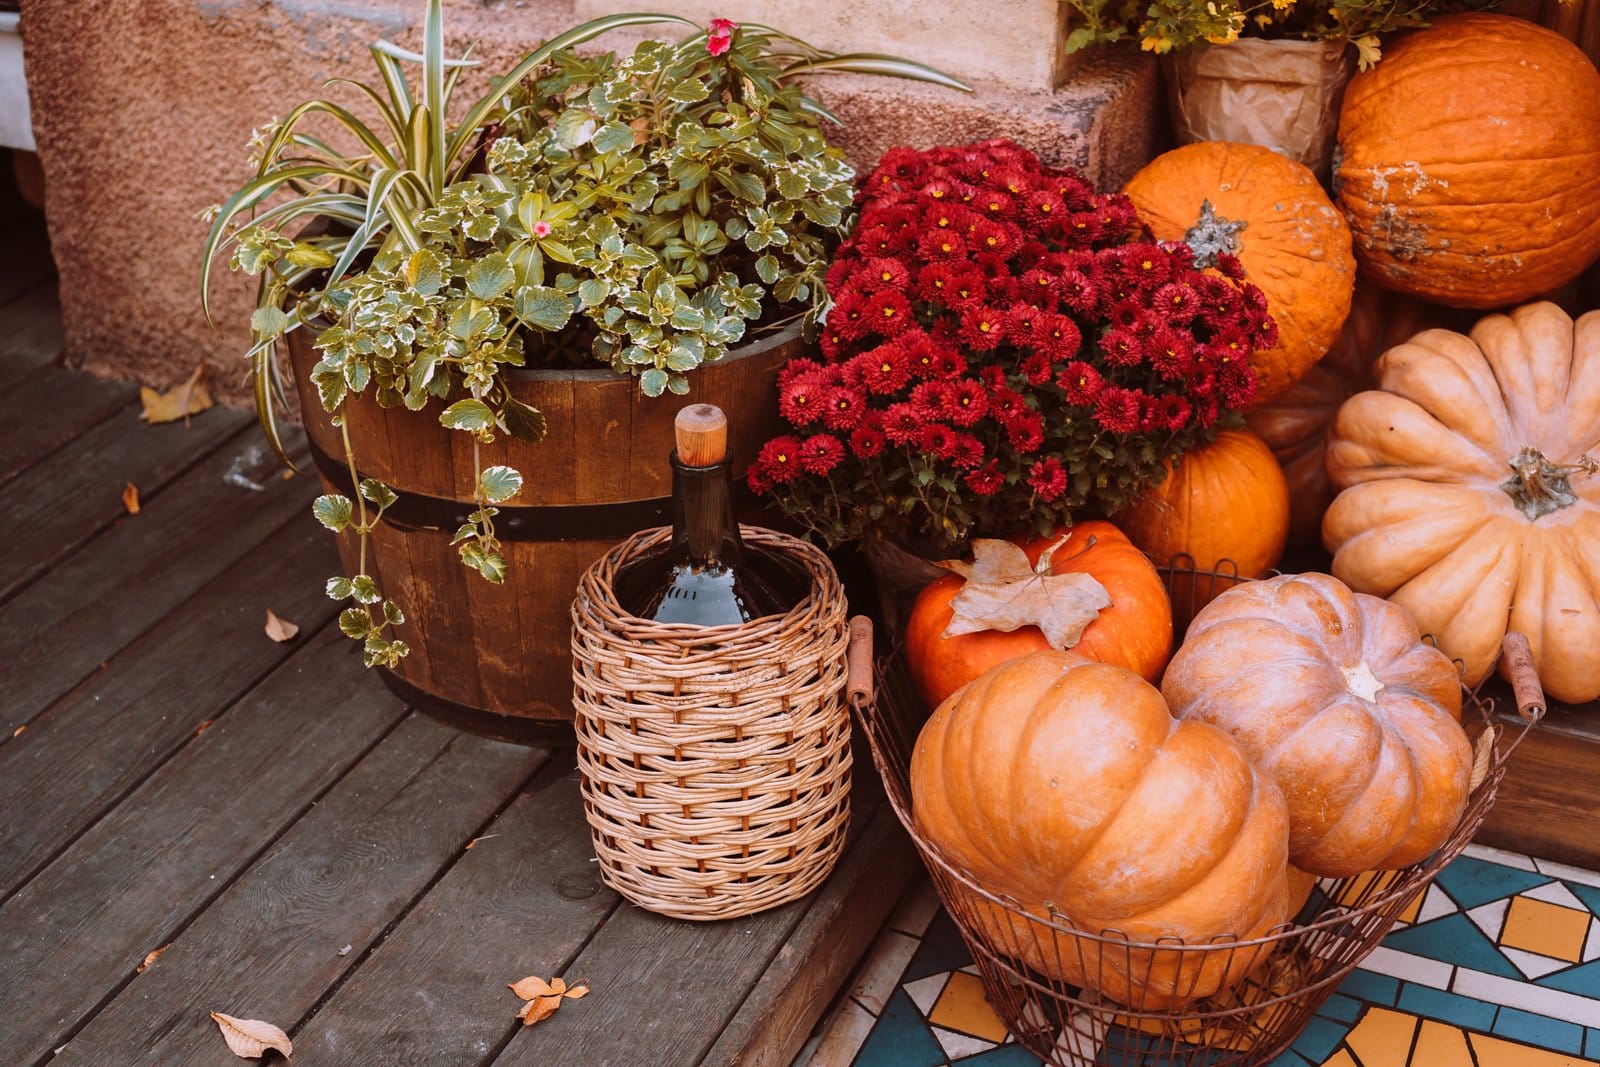 Autumn porch decor with pumpkins and flowers